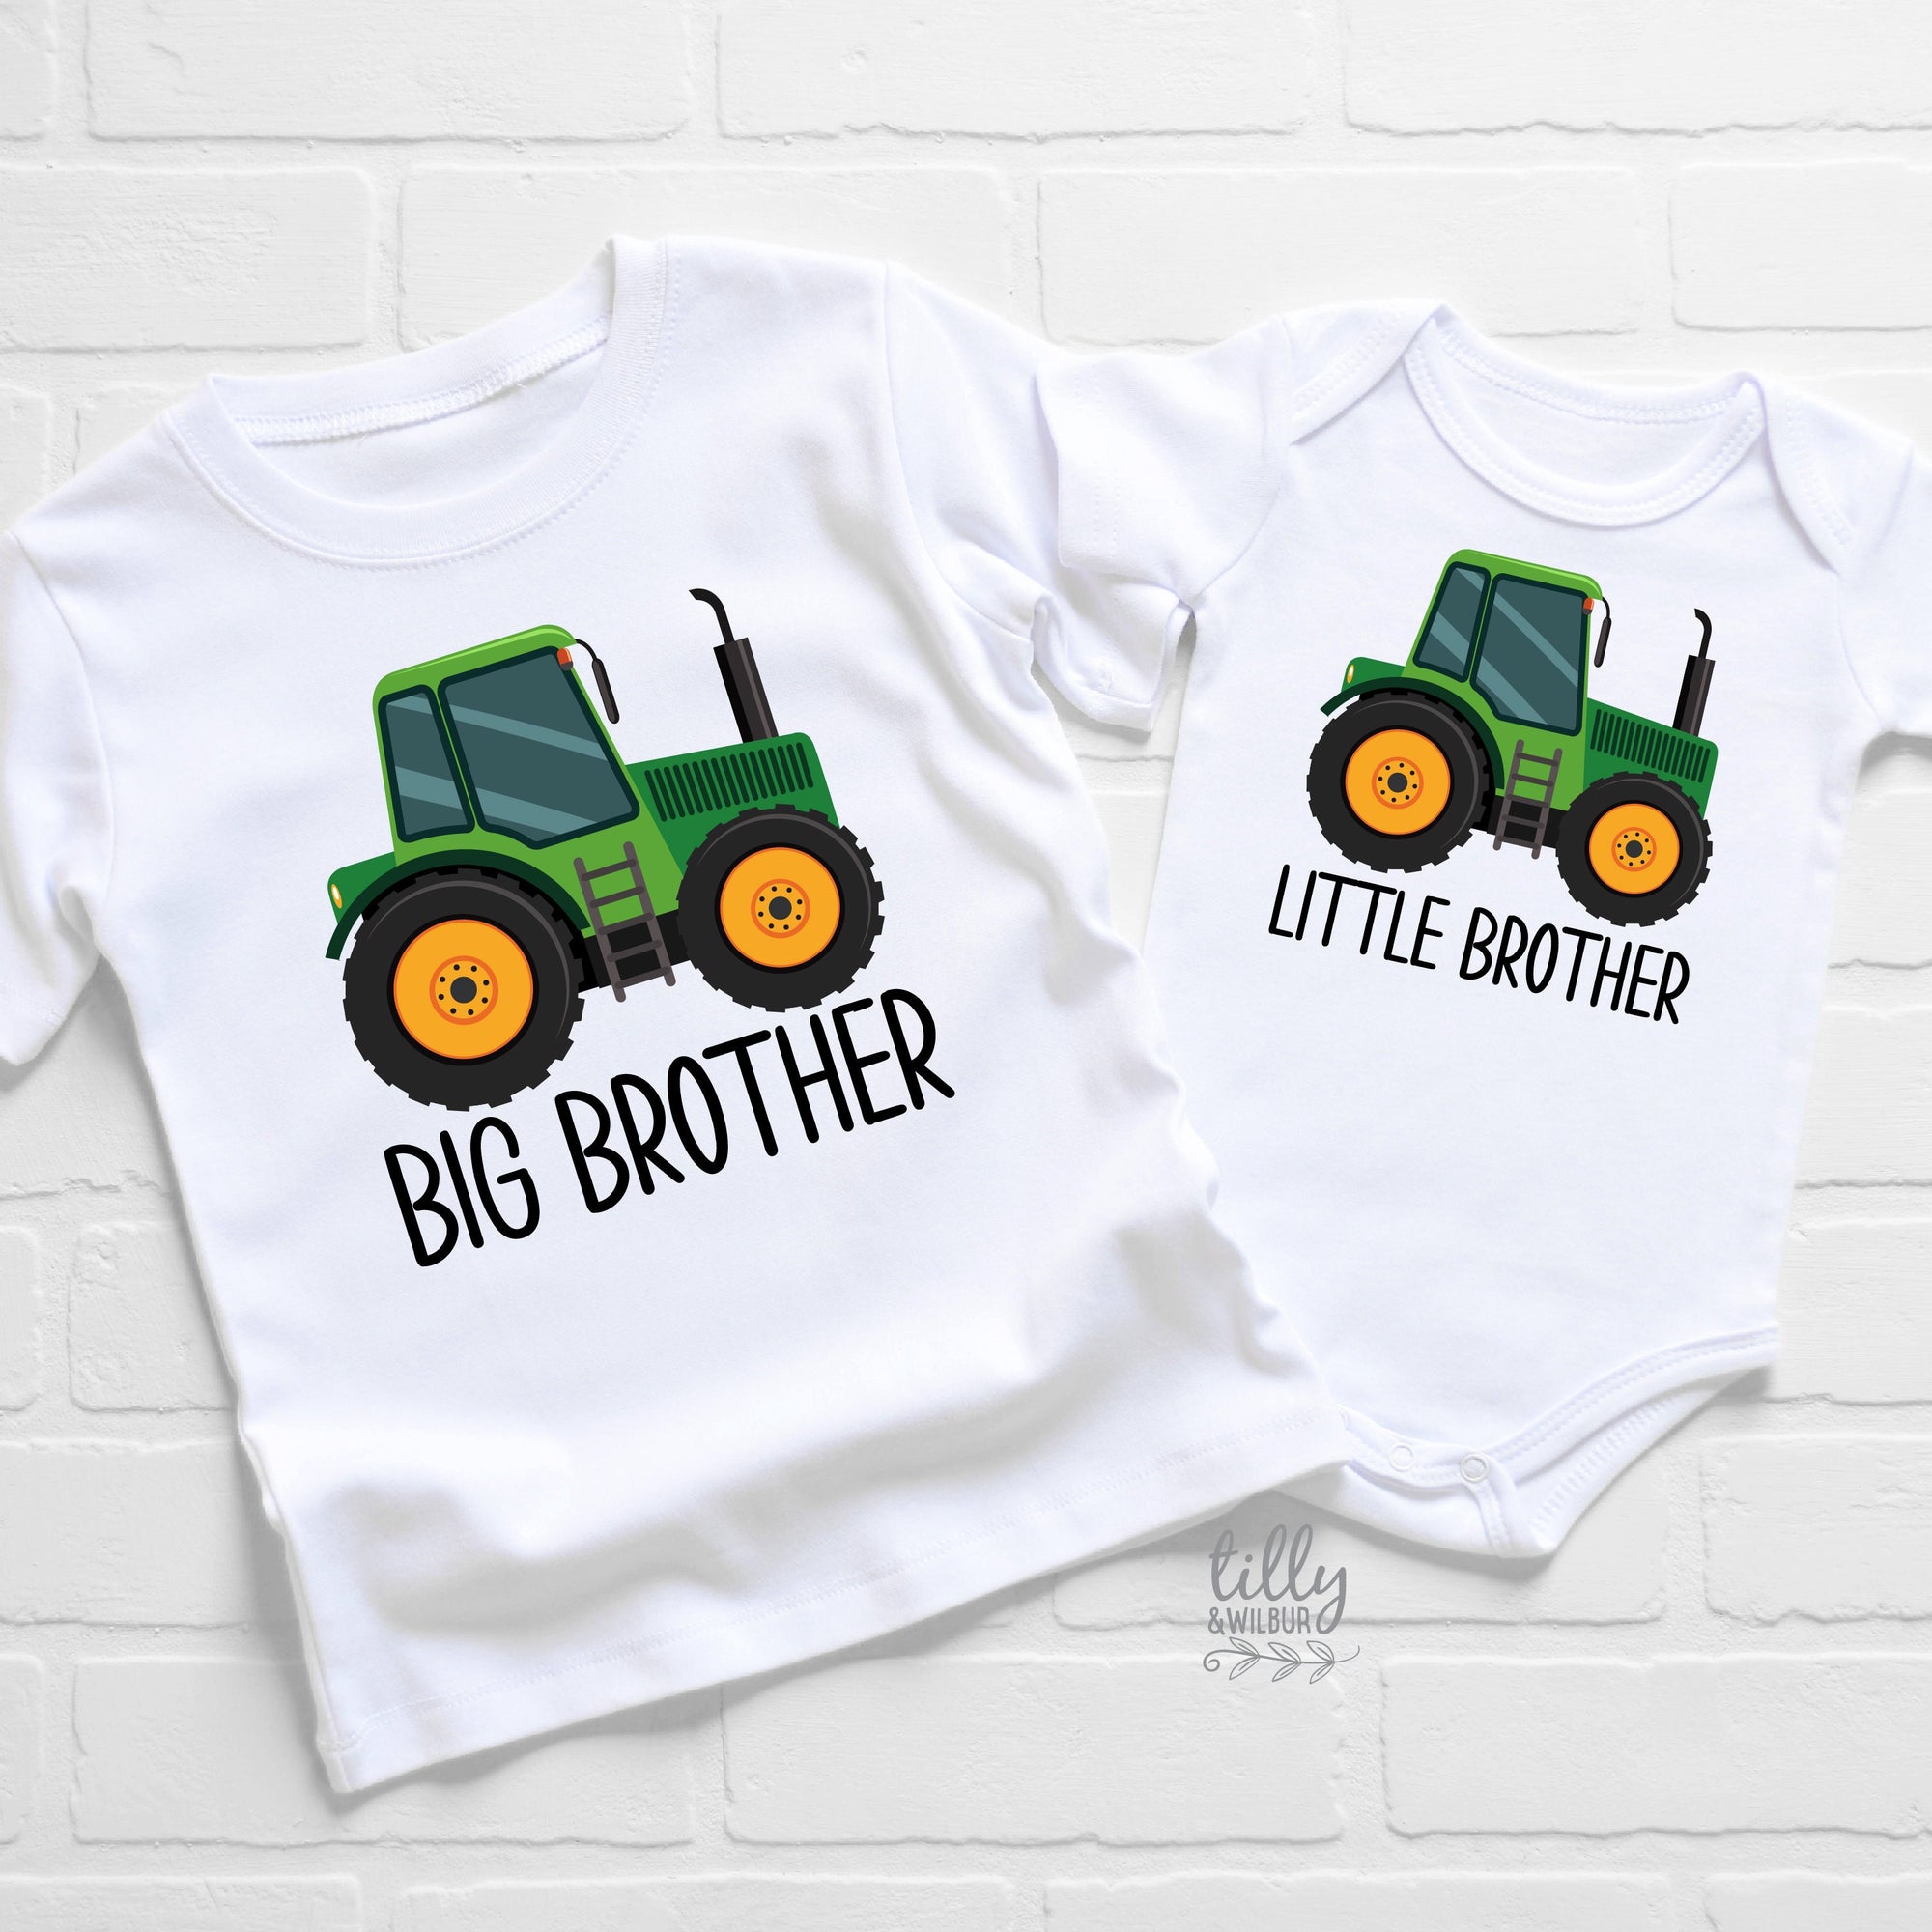 Big Brother Little Brother Set, Big Brother Little Brother Matching Outfits, New Baby Brother, Sibling Set, I'm Going To Be A Big Brother